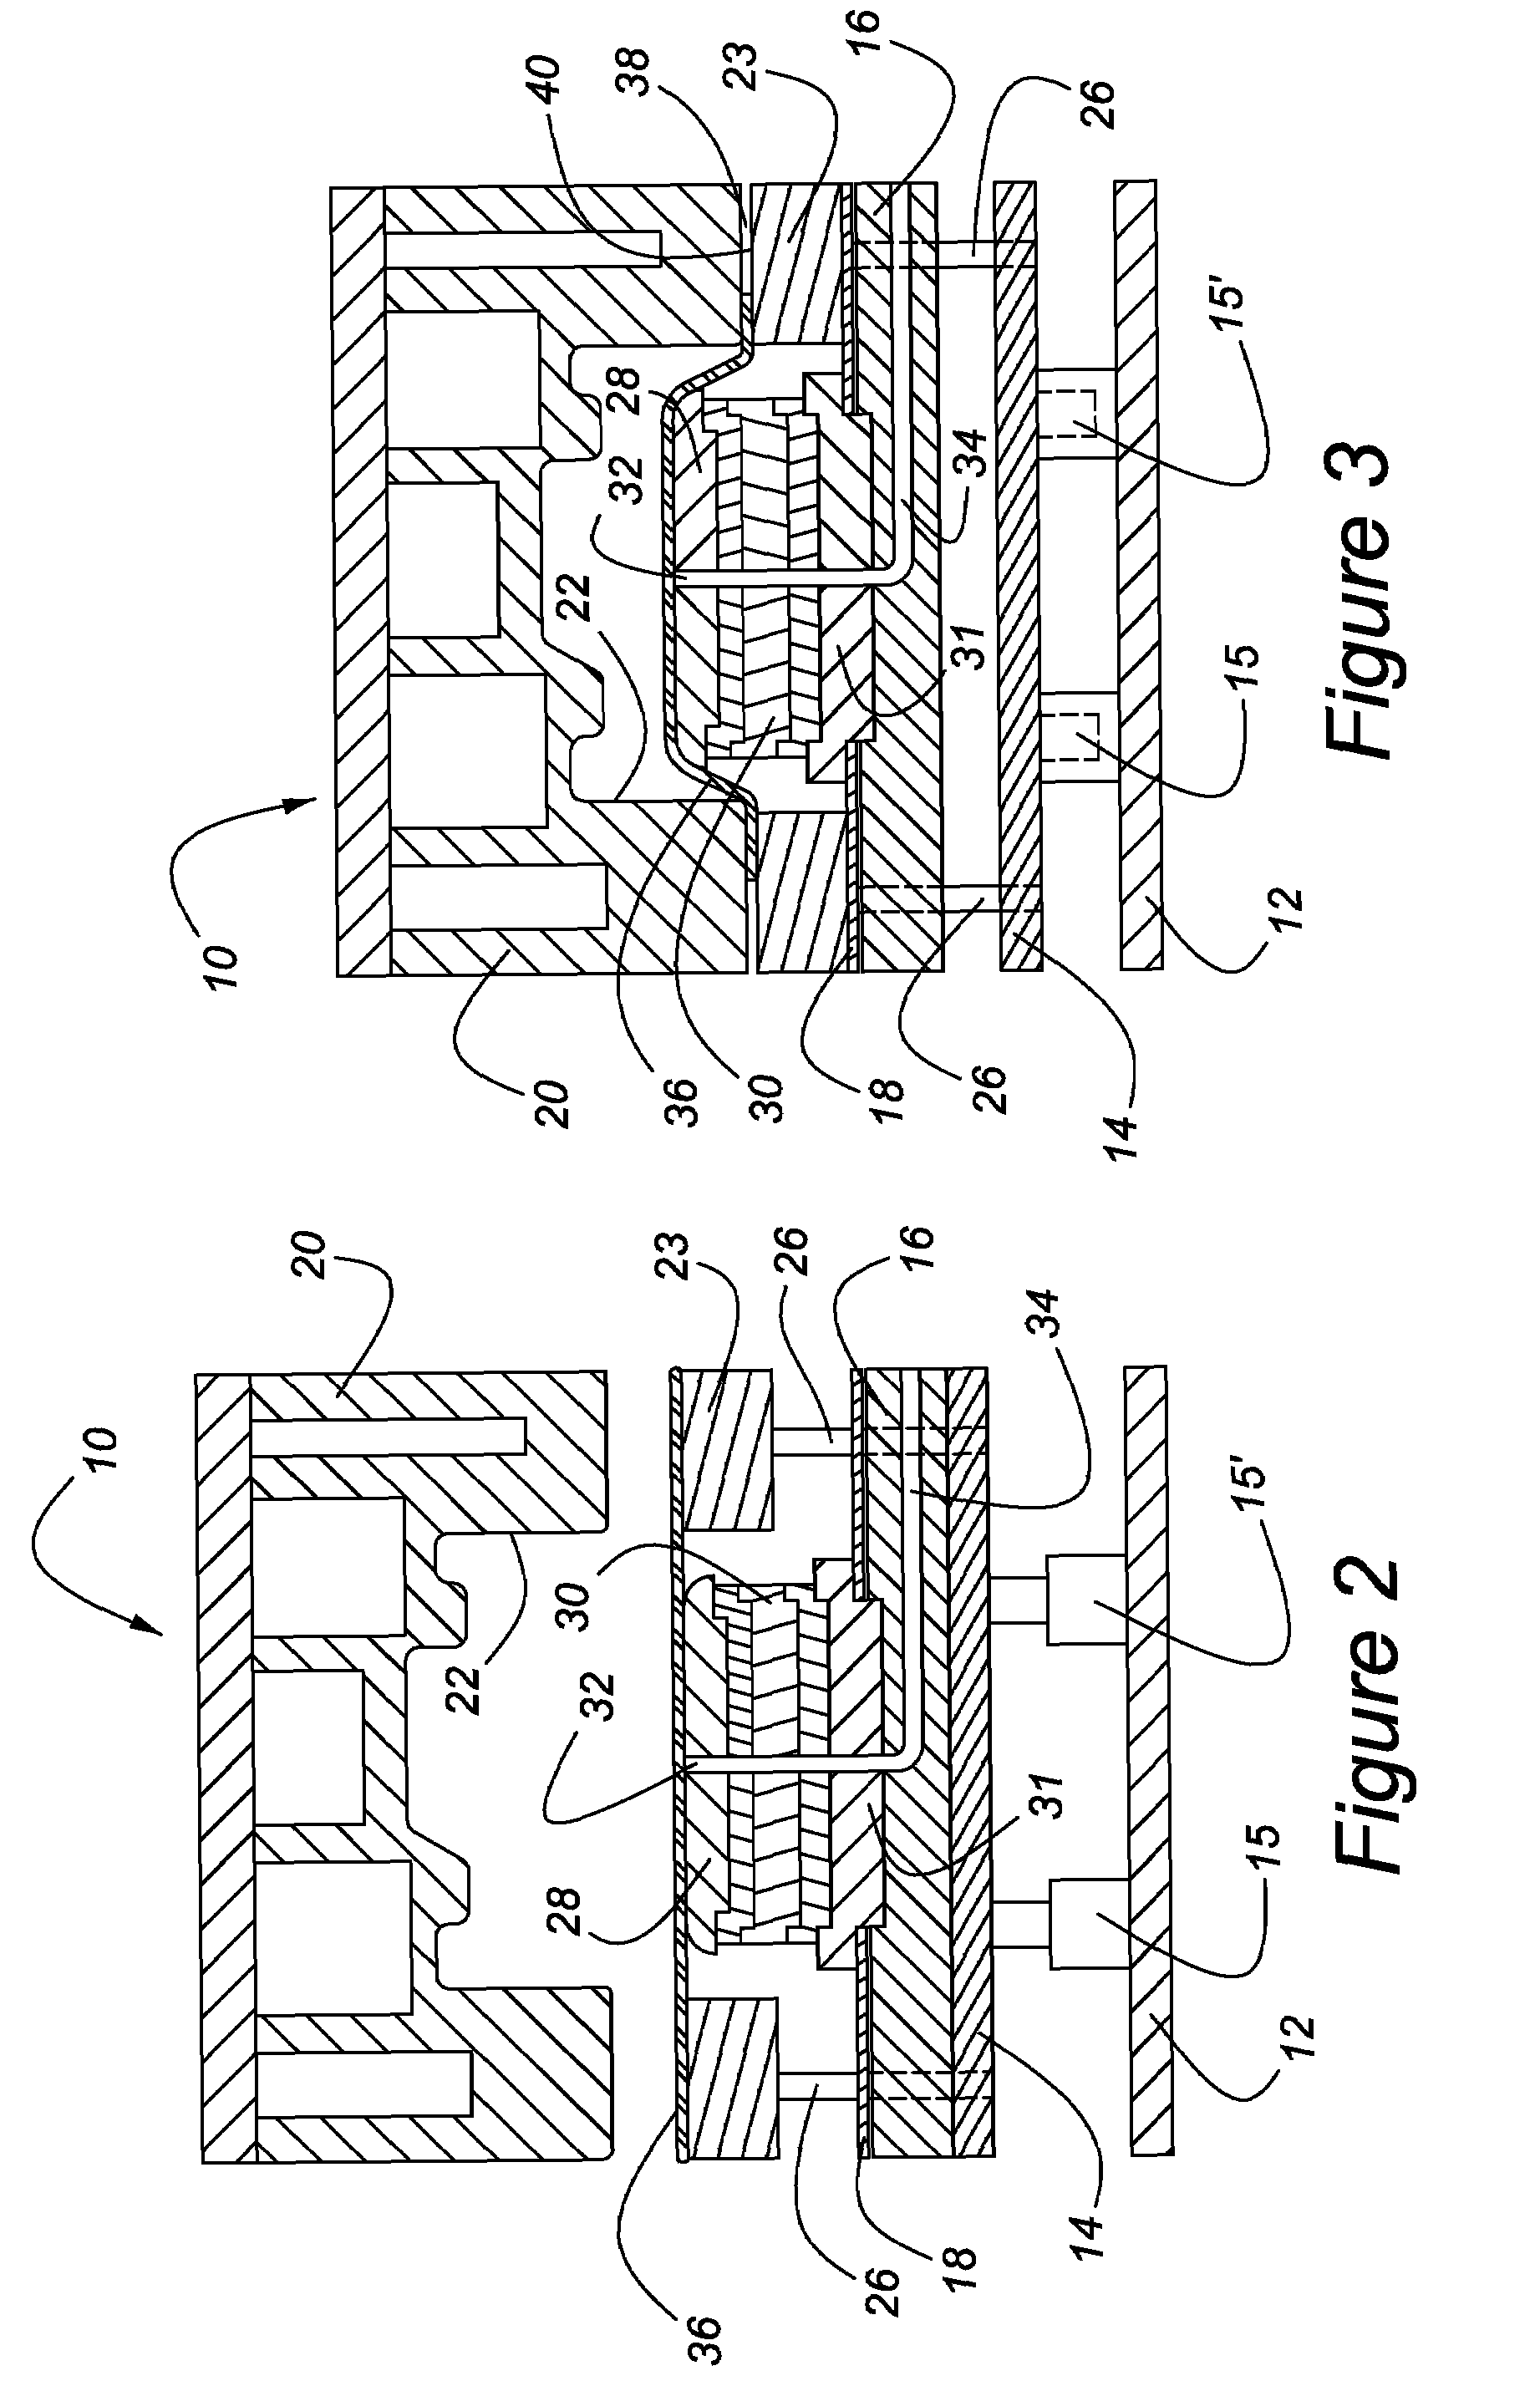 Method and apparatus for gas management in hot blow-forming dies